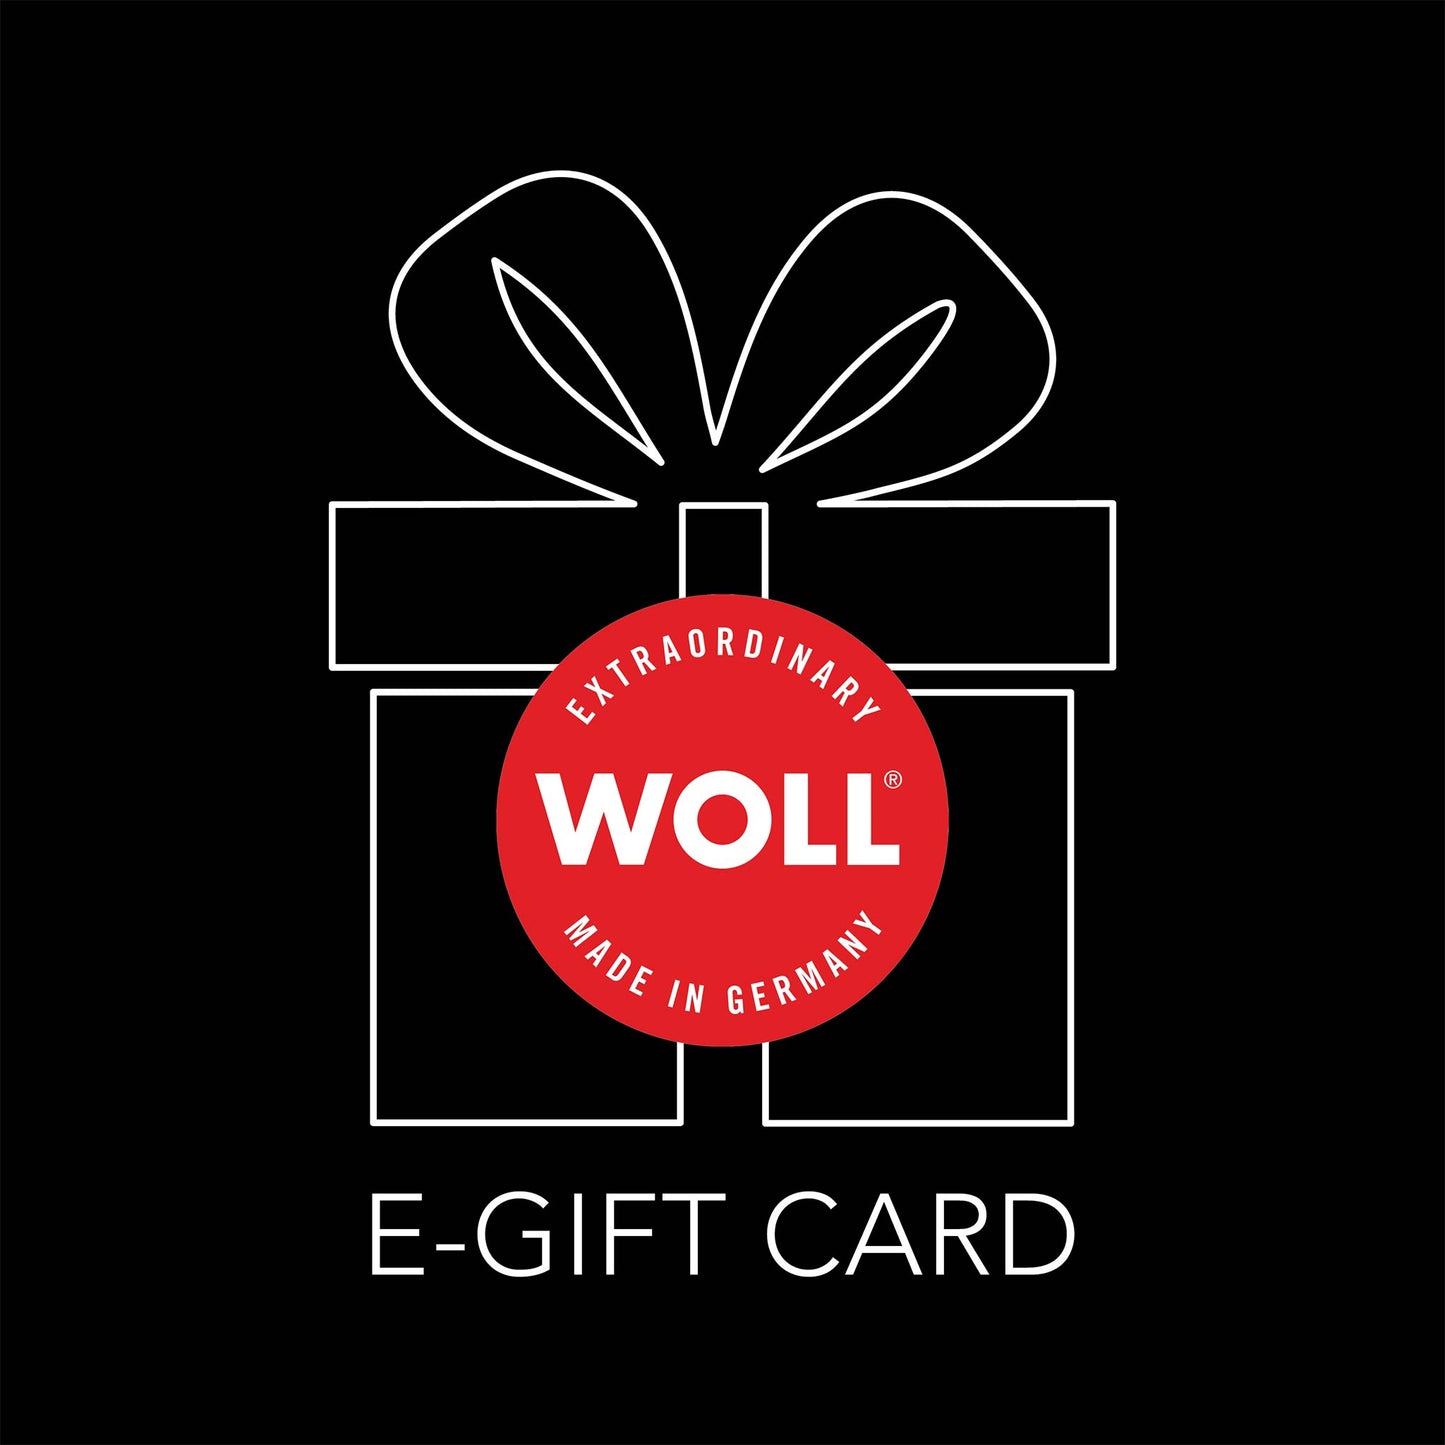 Woll Cookware New Zealand E-Gift Cards